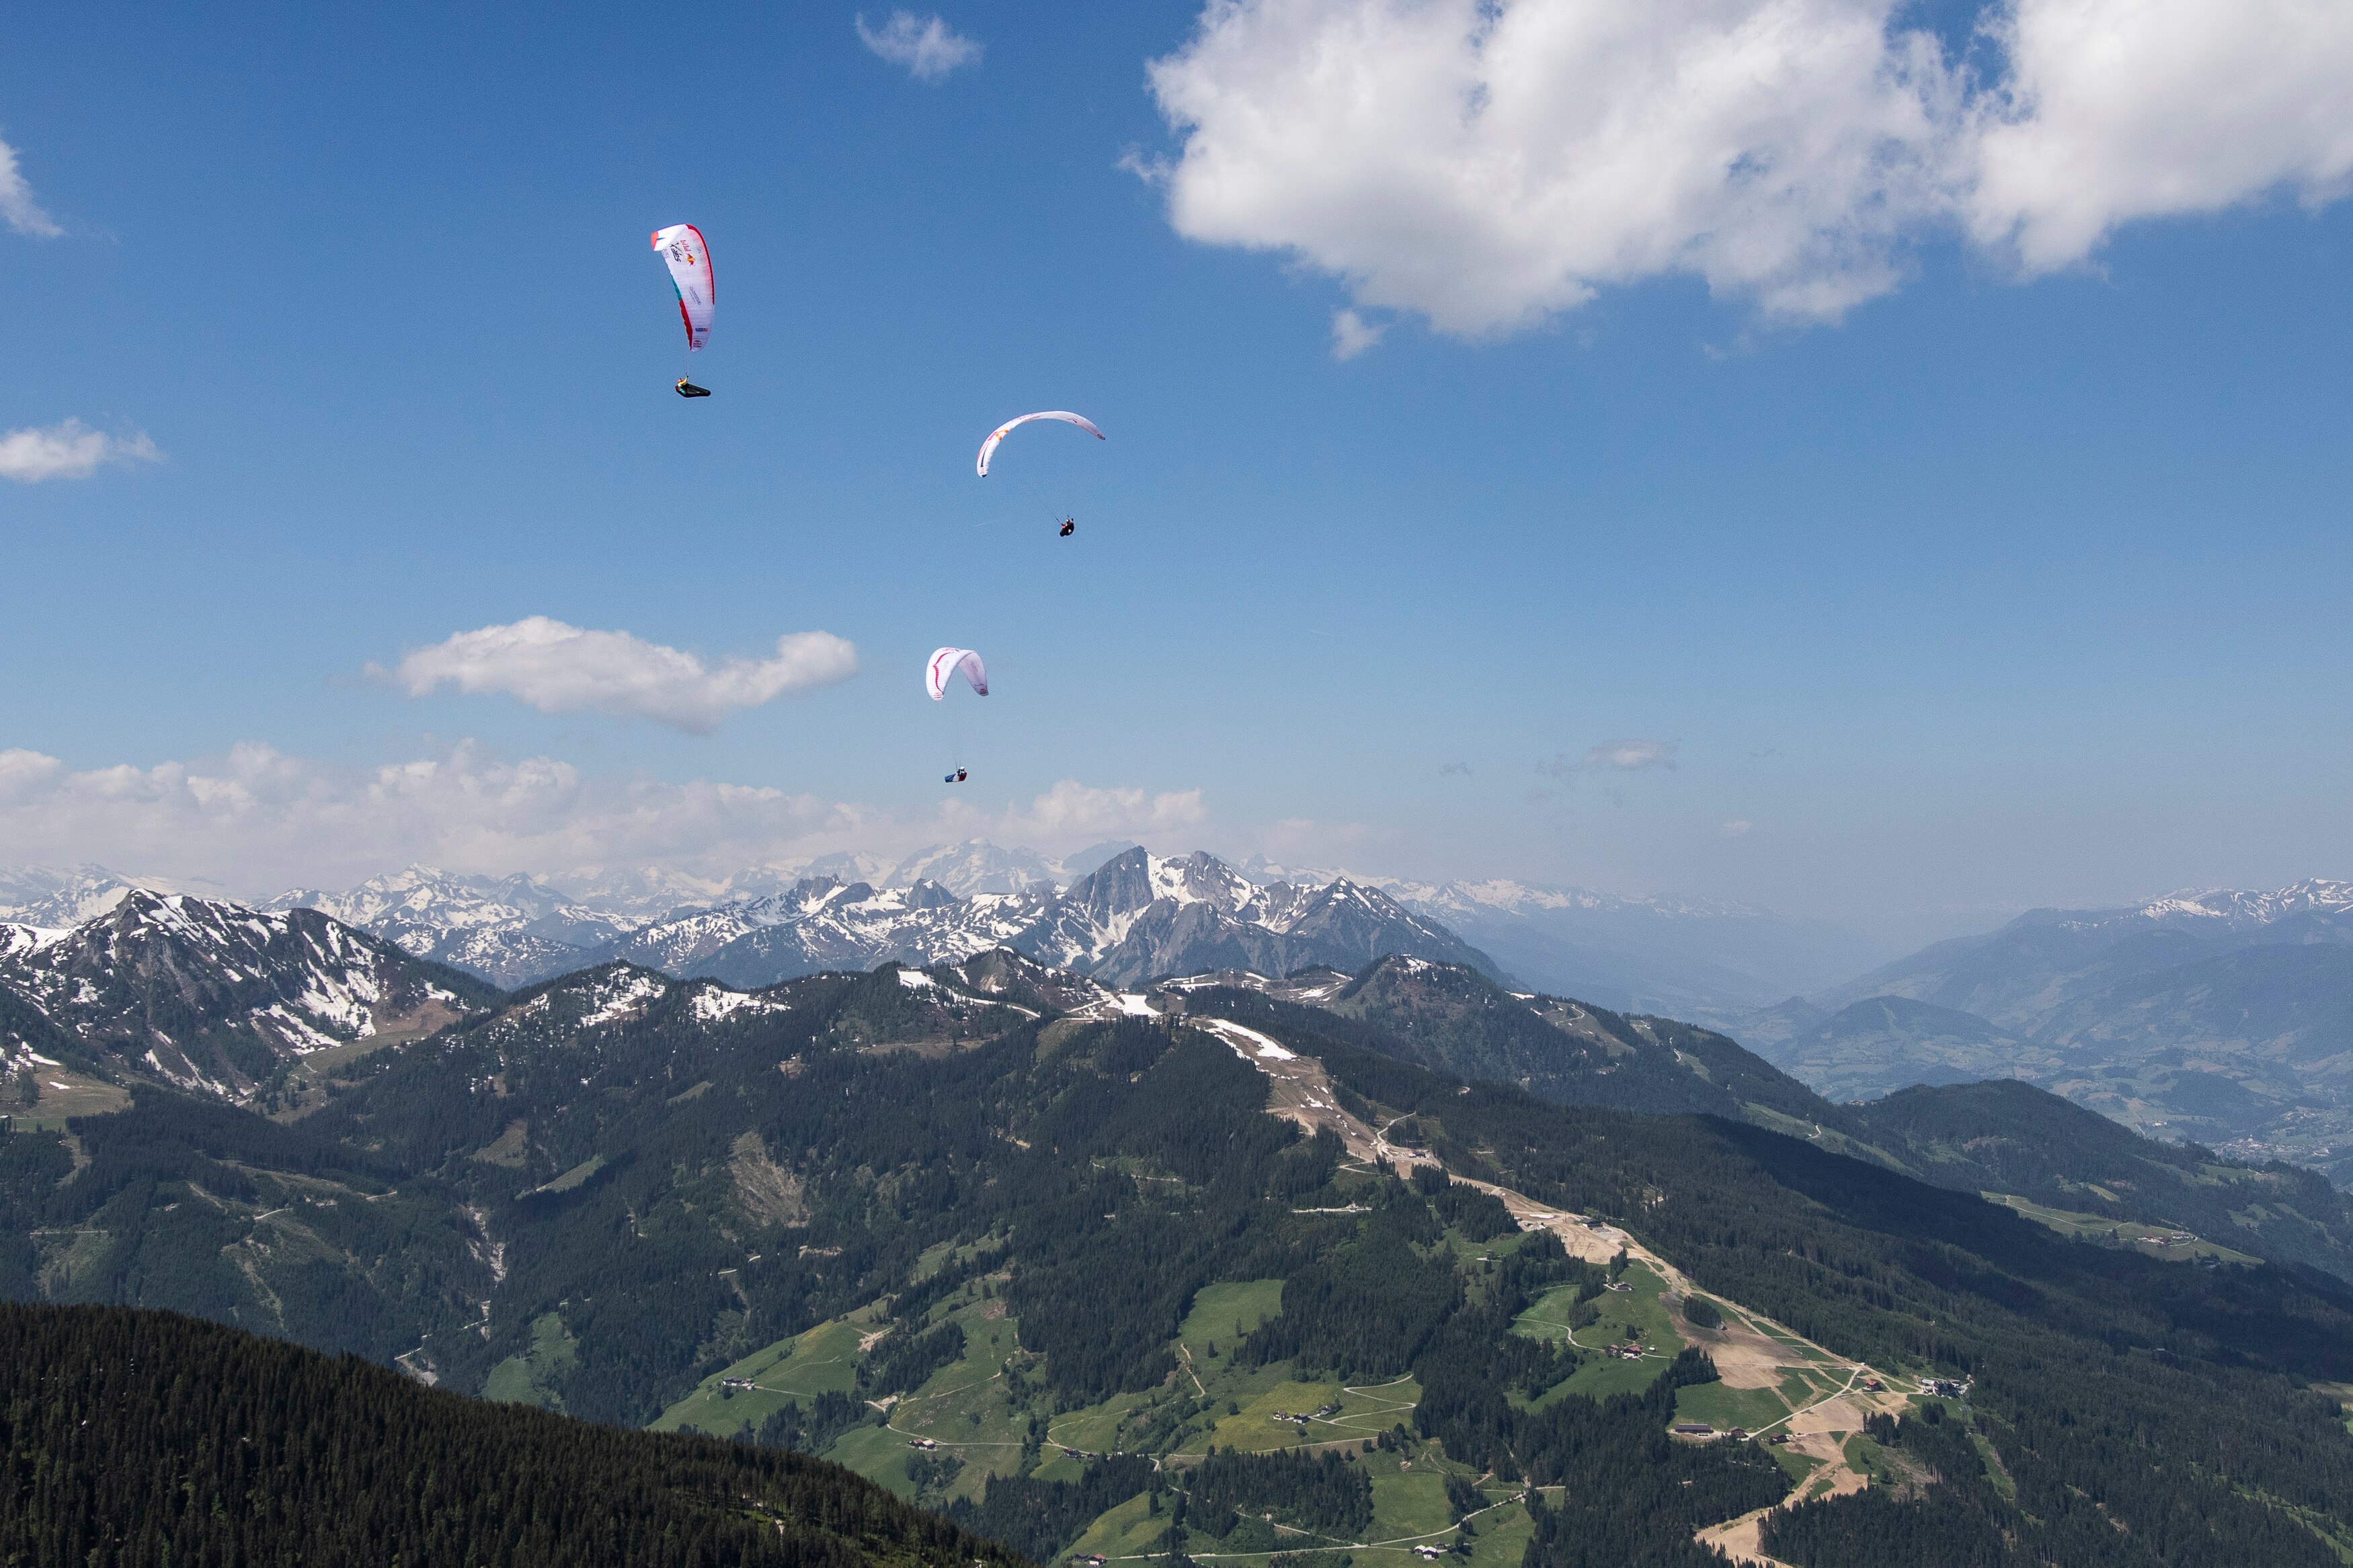 Participants perform during the Red Bull X-Alps prologue in Wagrain, Austria on June 13, 2019